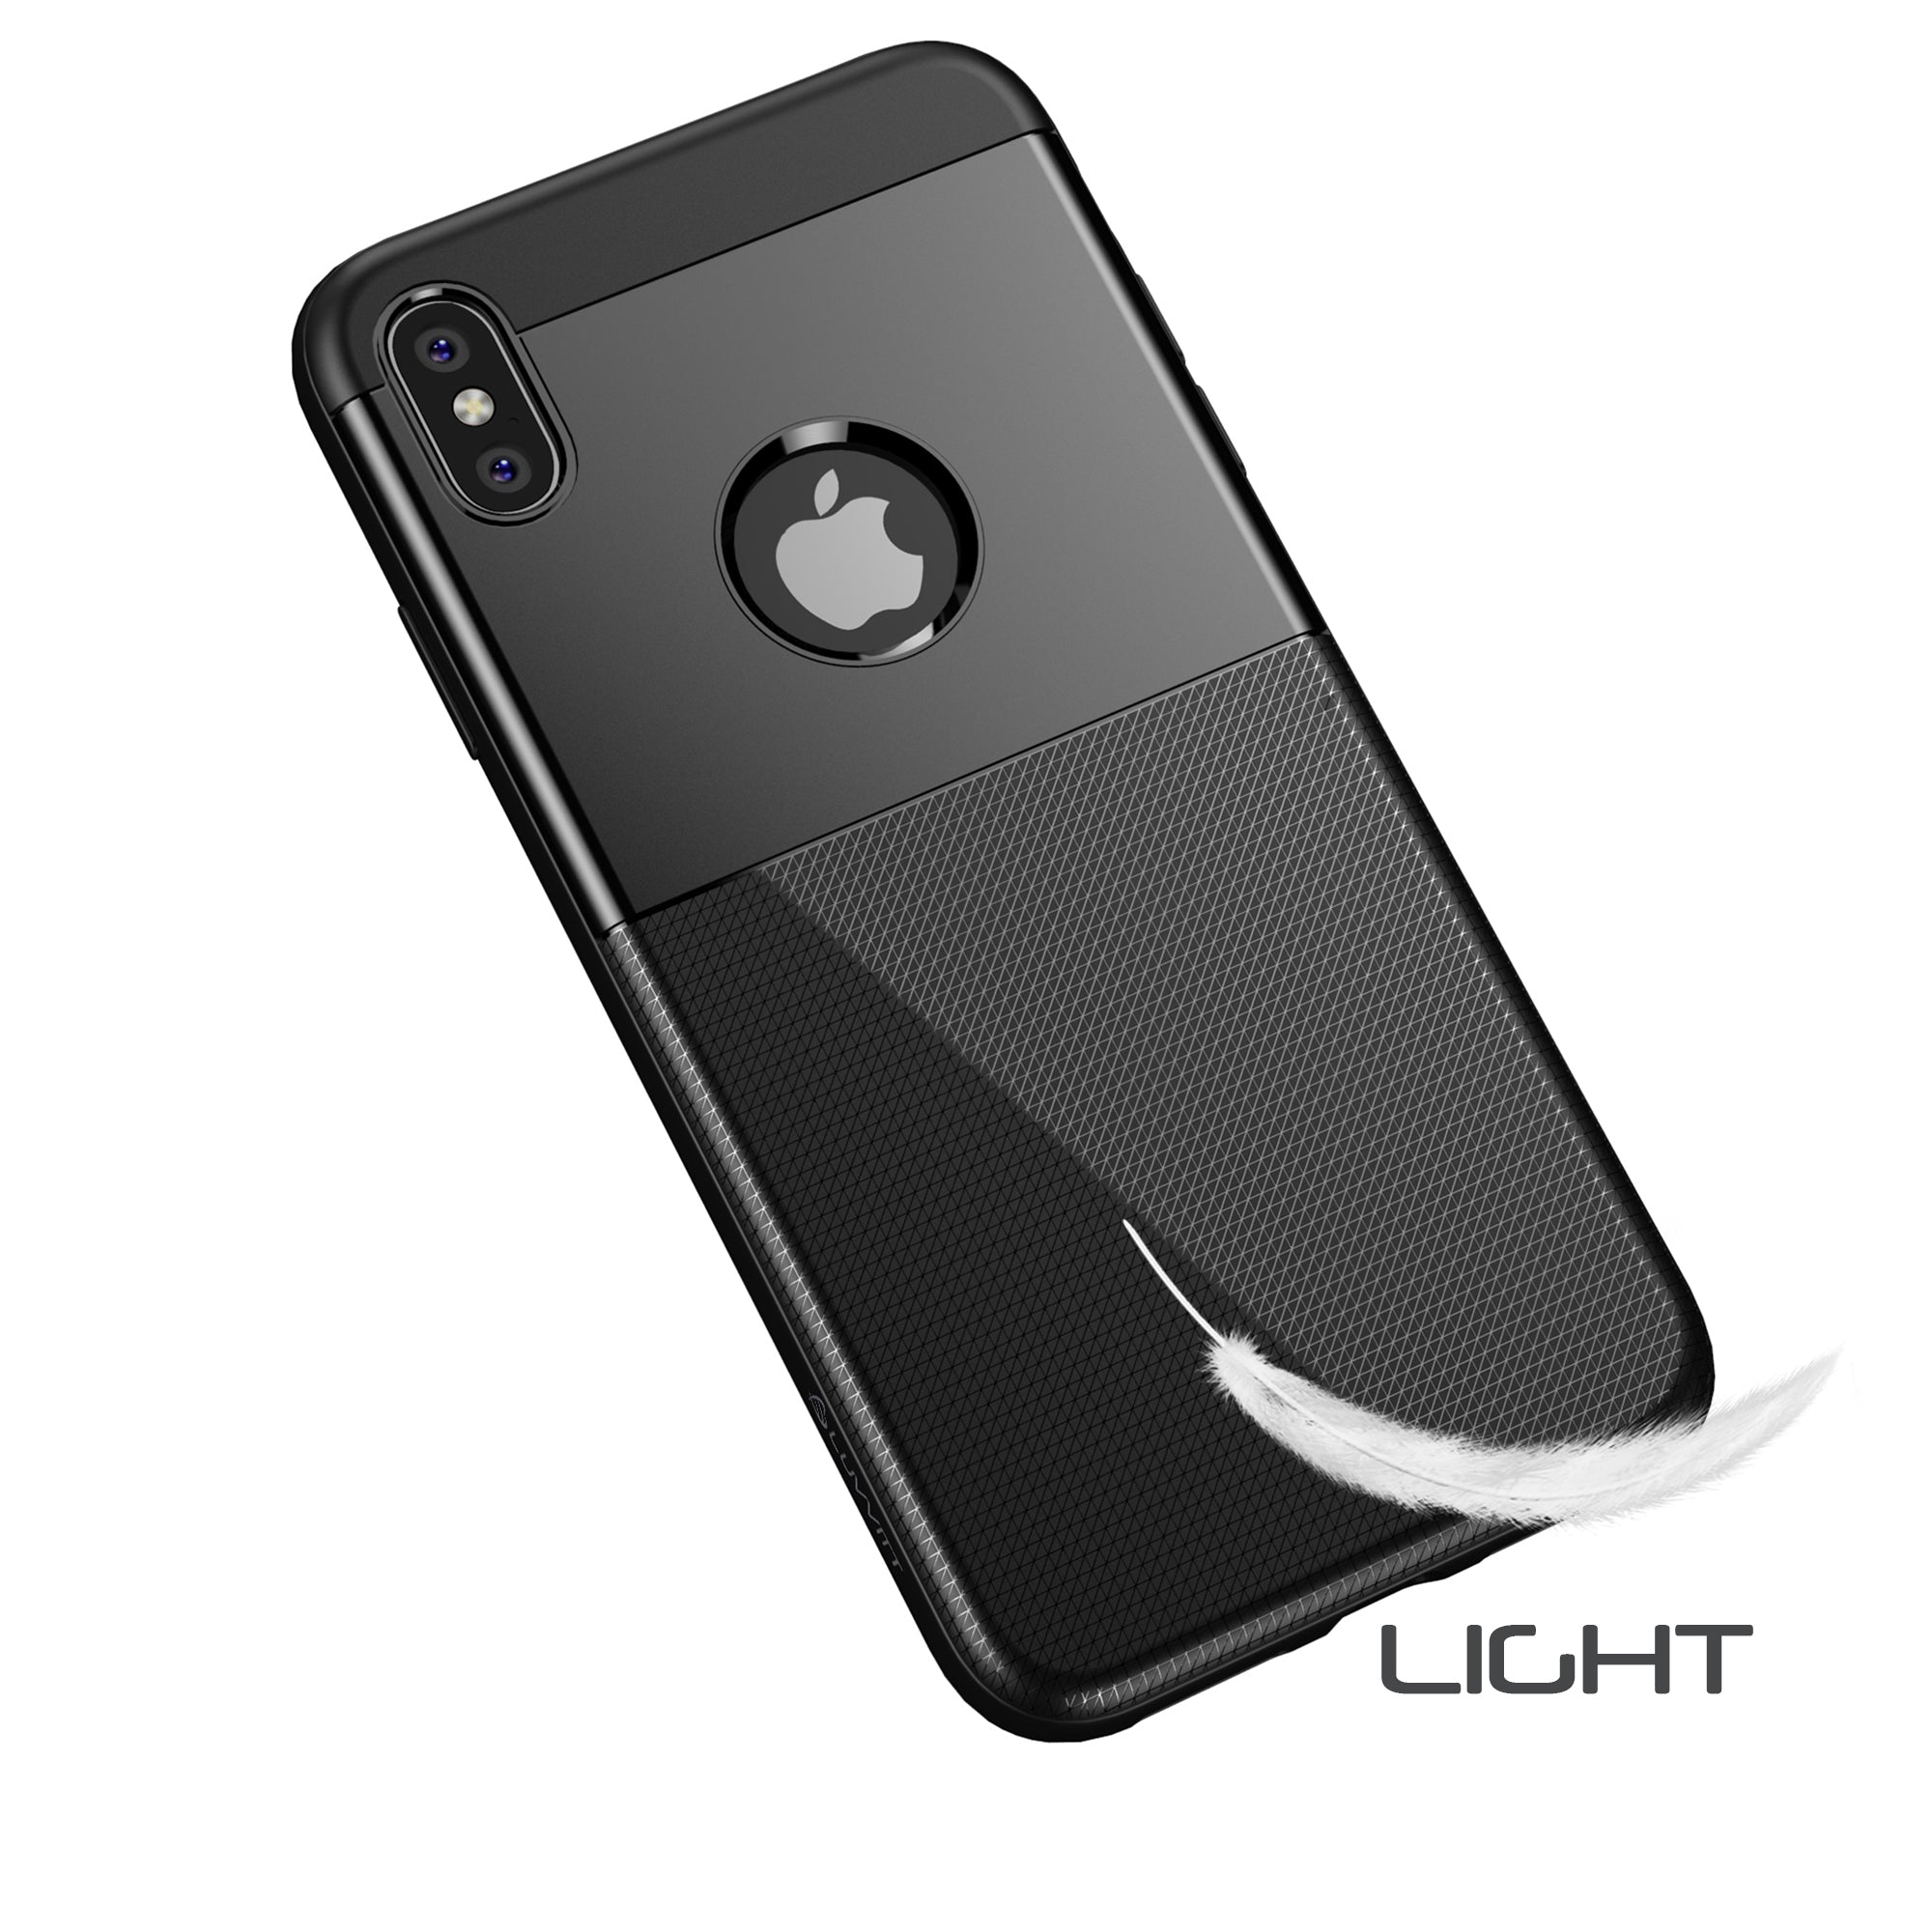 Luvvitt iPhone XS Max Case Sleek Armor Cover for 6.5 inch Screen 2018 - Black